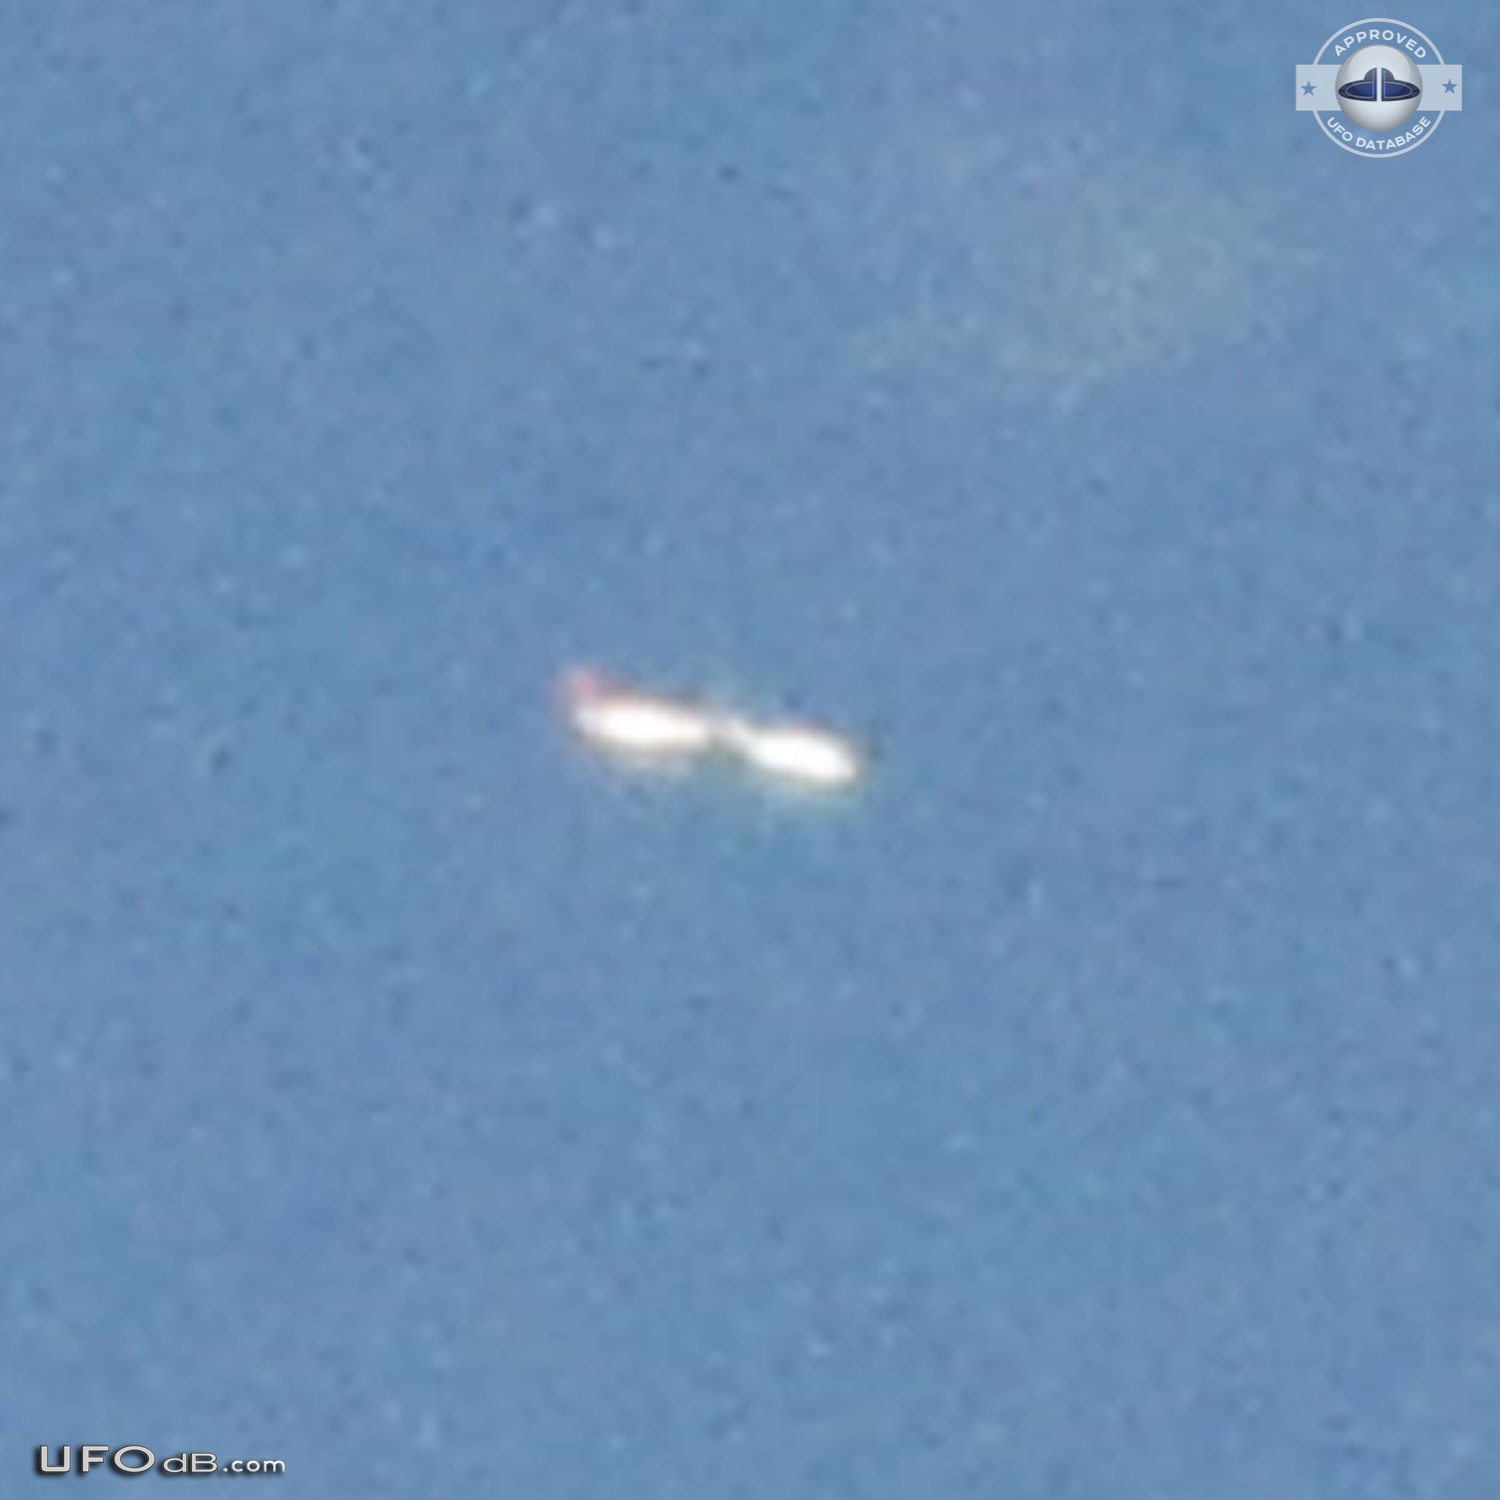 Woman and Son sees shinny square UFO in Sarasota Airport, Florida 2012 UFO Picture #520-4